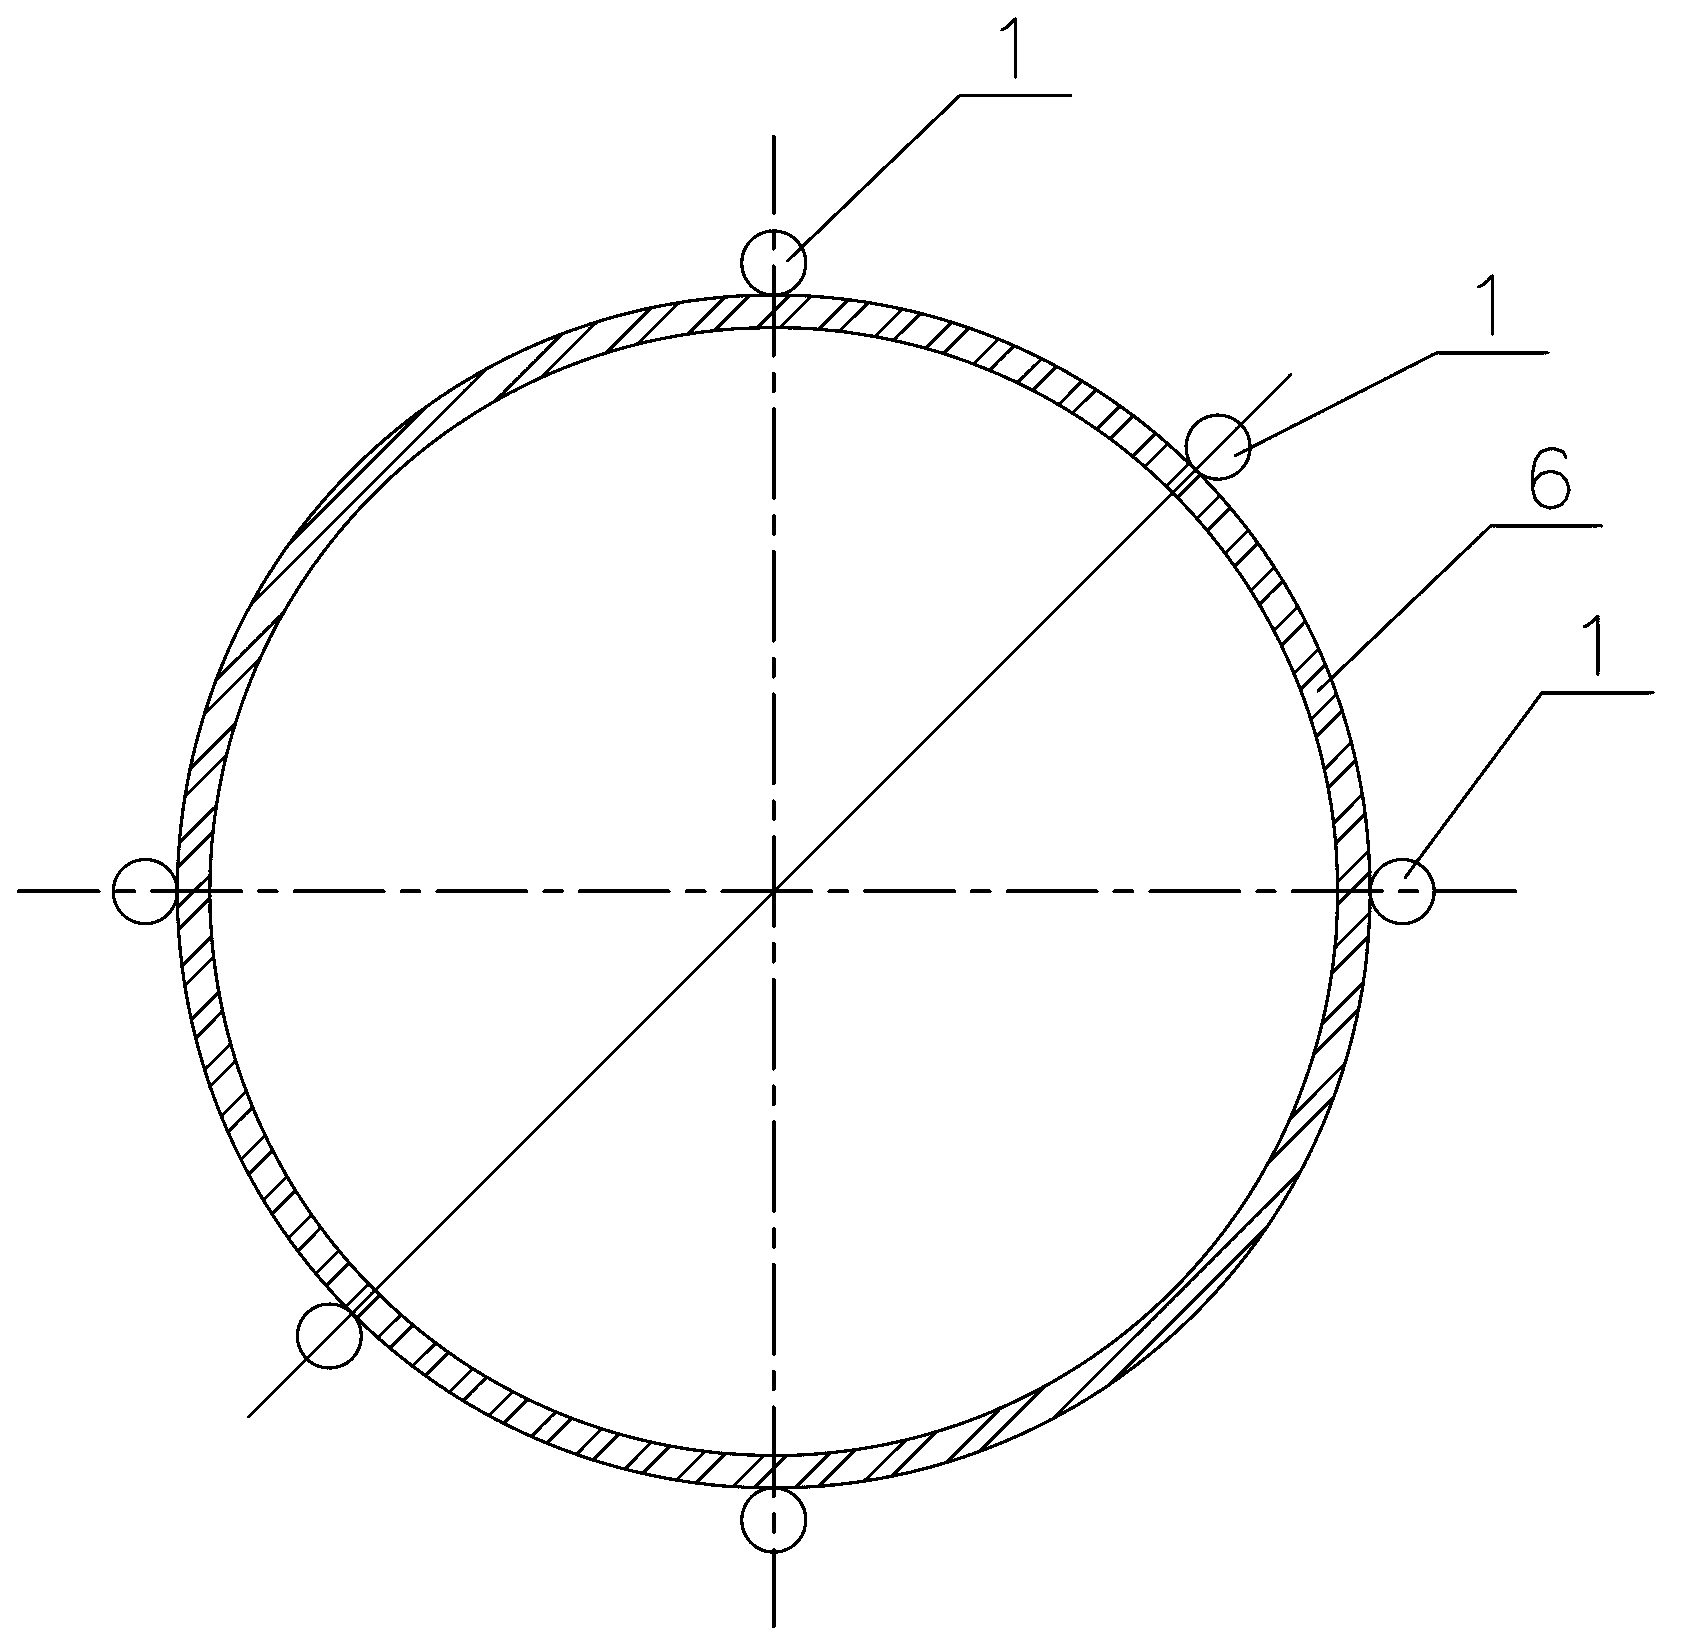 Inbuilt method for distributed type sensing cable in foundation pile